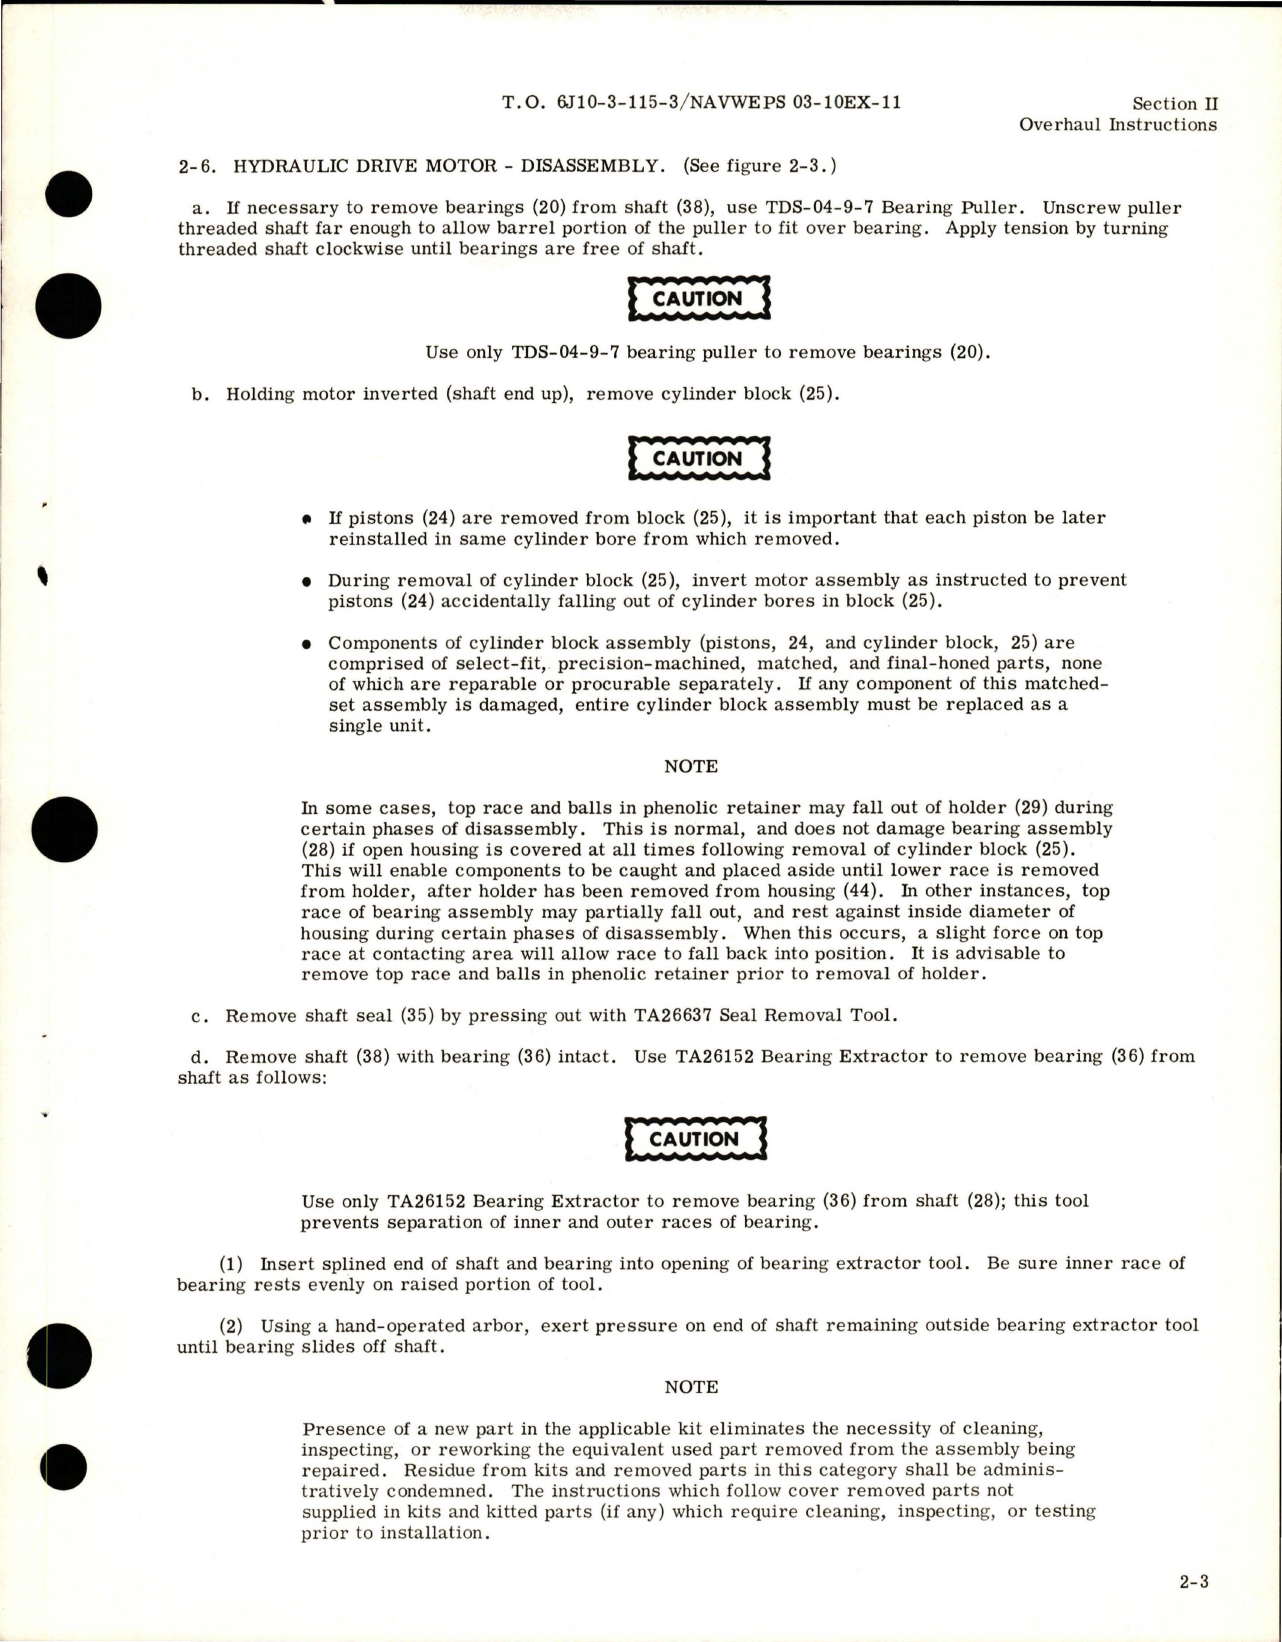 Sample page 9 from AirCorps Library document: Overhaul for Fuel Transfer Pump Assembly